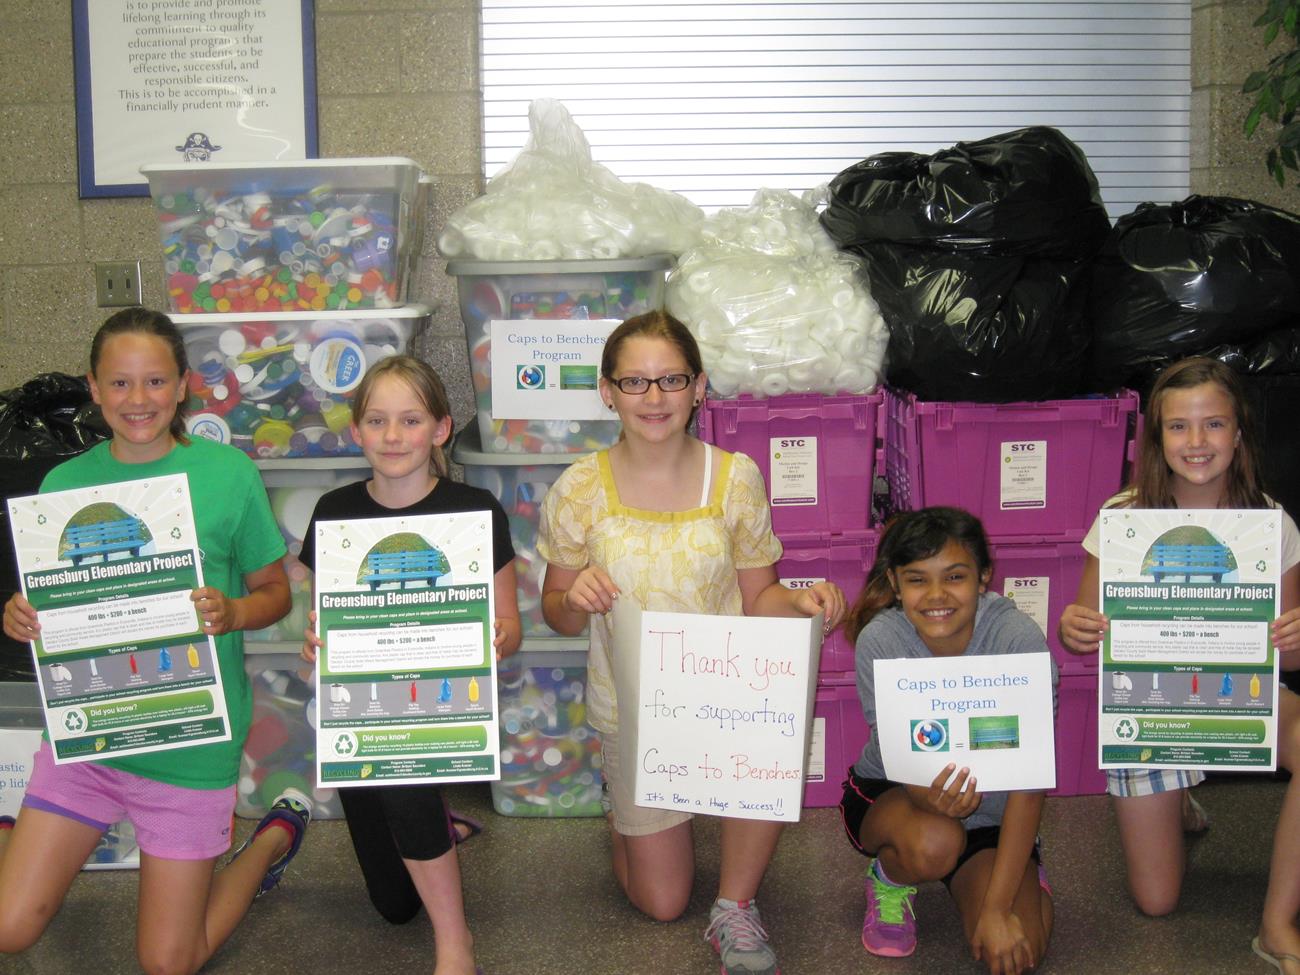 5 children holing up the DCRW Recycling signs